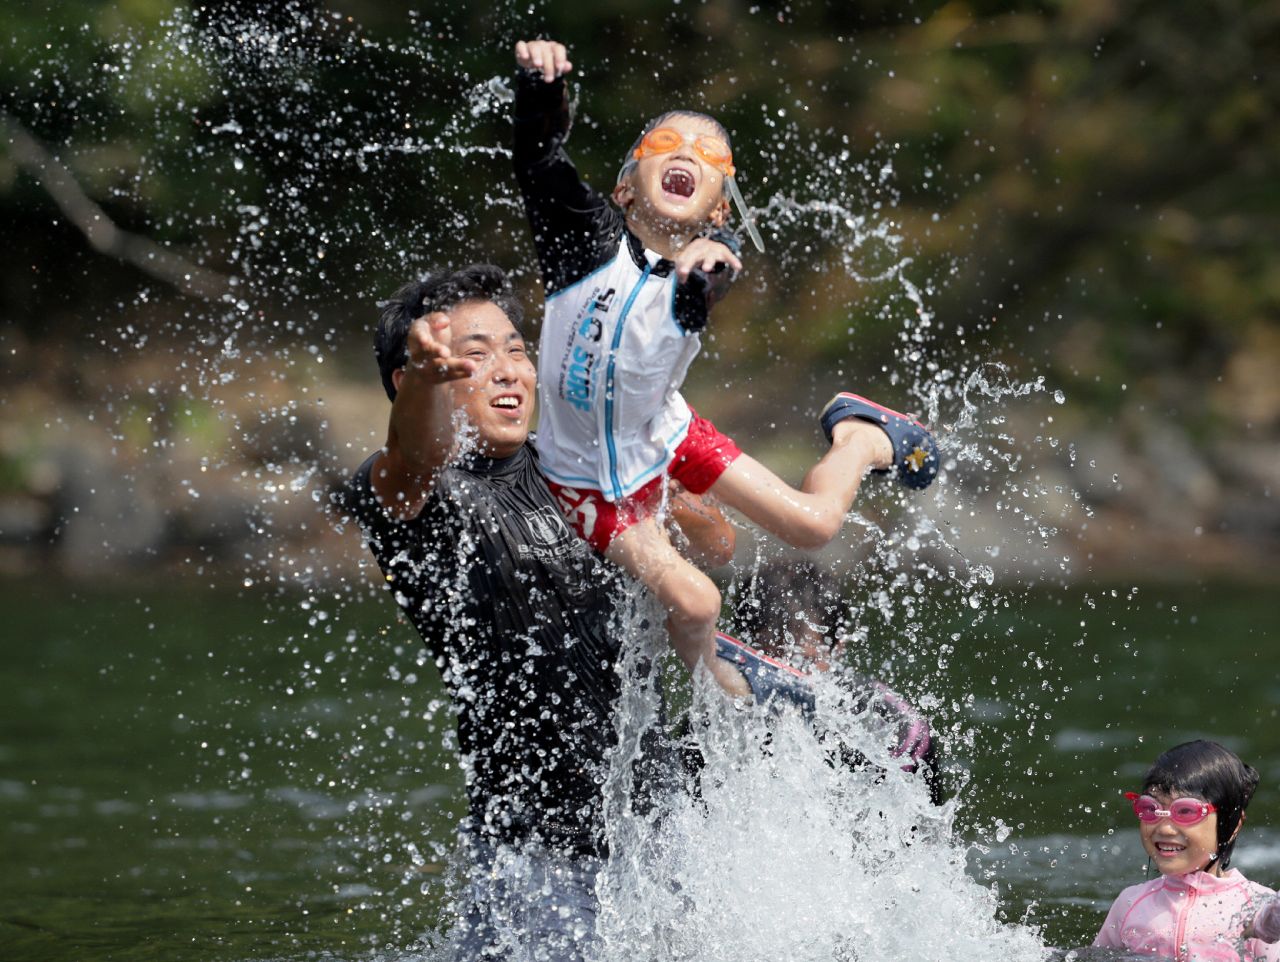 Family members cool off in the river in Shimanto, Japan, on August 14. The temperature reached 41 degrees Celsius (105.8 degrees Fahrenheit) in the city in southern Japan and <a href="http://www.cnn.com/2013/08/13/world/asia/asia-heat/index.html">set a new national record</a>, according to the Japanese Meteorological Agency.